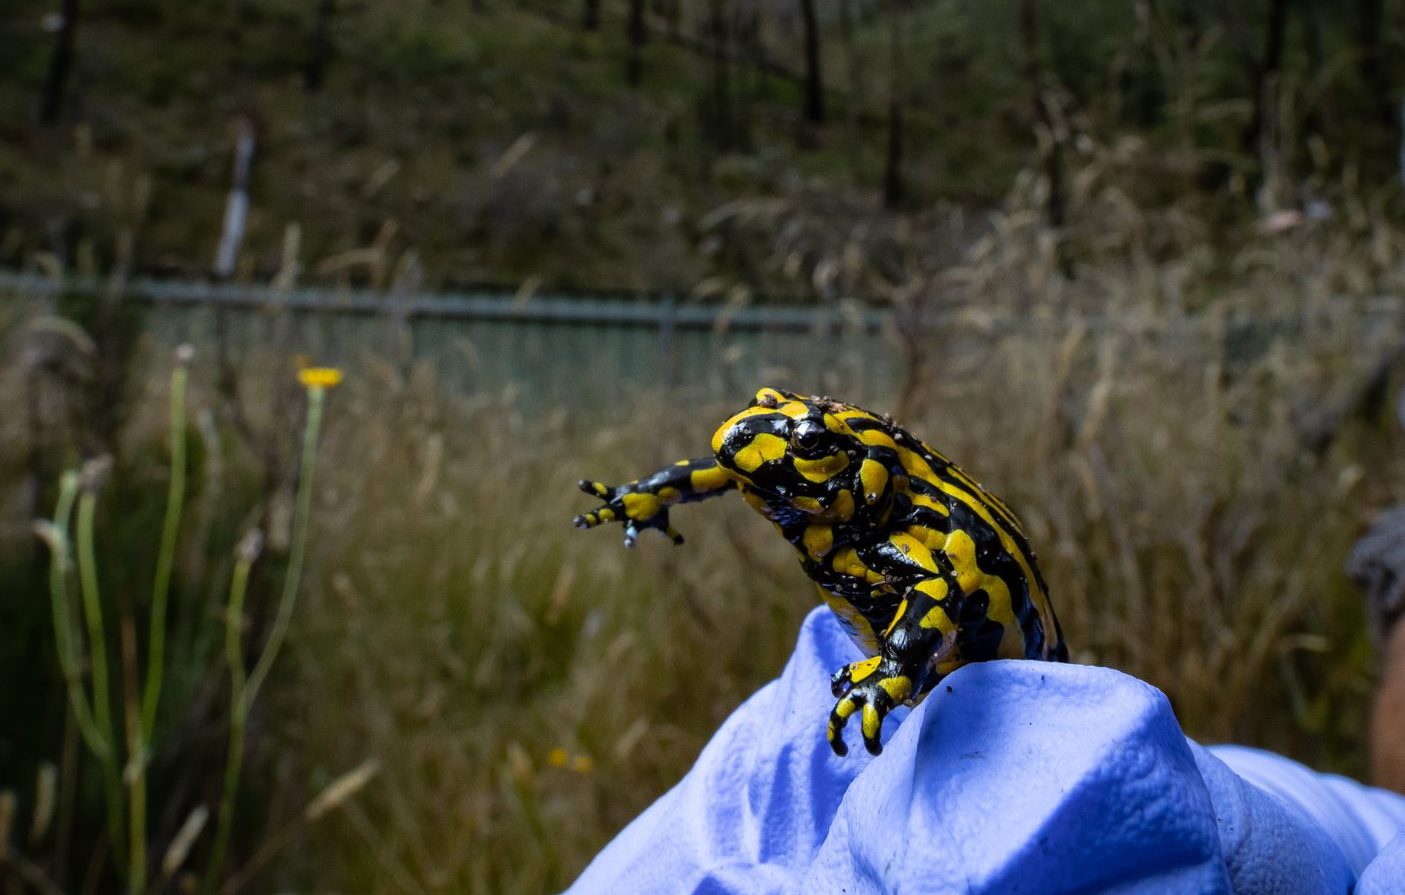 Sprinkler systems to protect endangered Corroboree Frogs from fires in Kosciuszko National Park